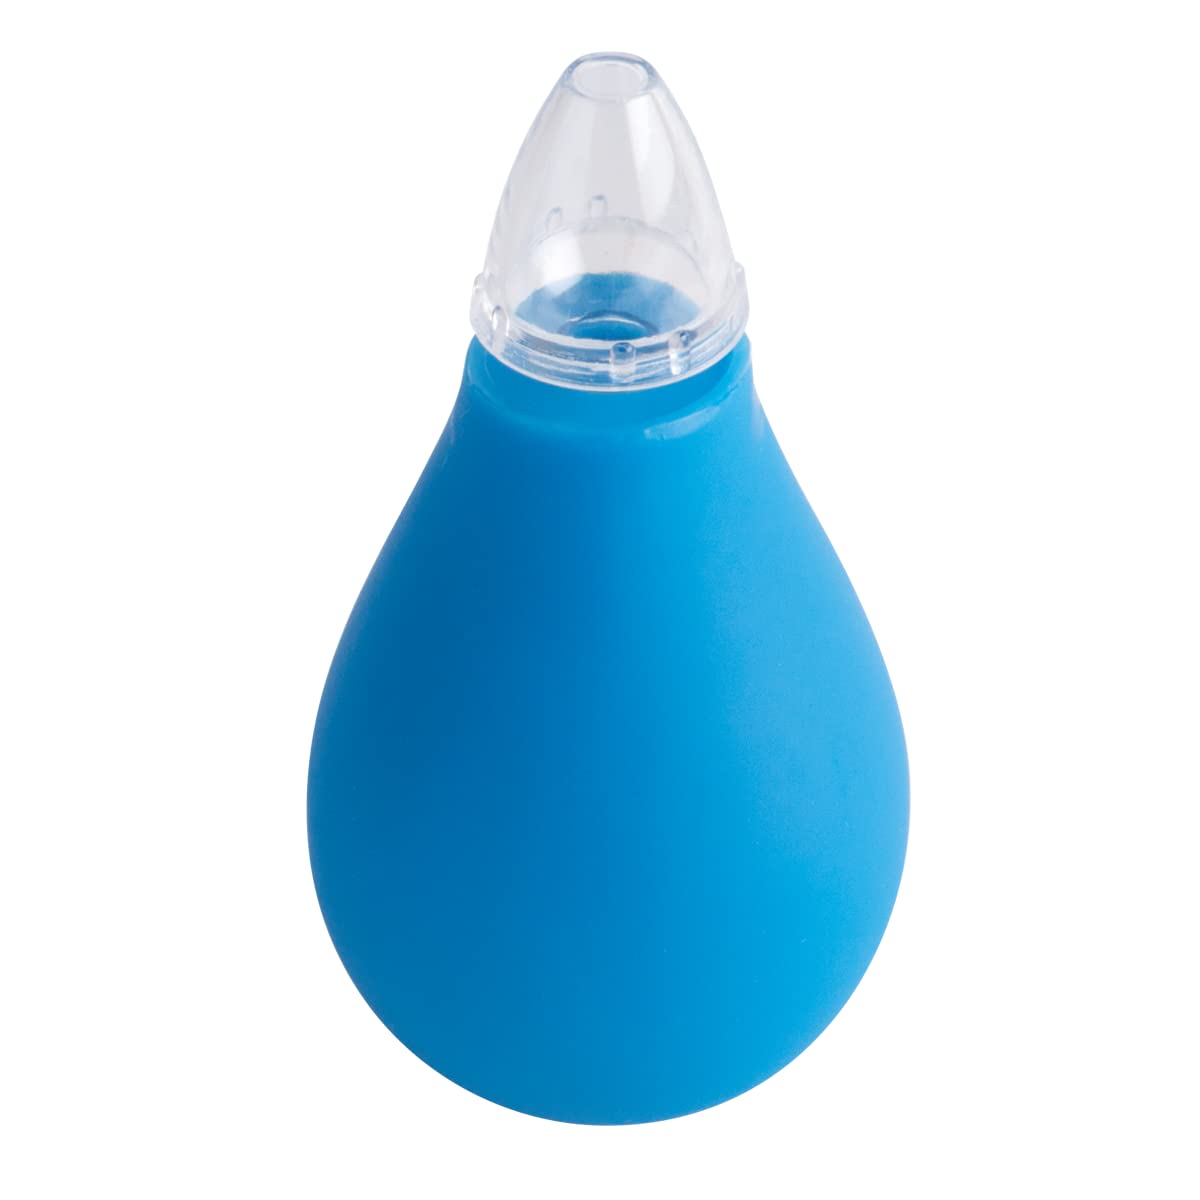 Acu-Life Nasal Aspirator, Sinus Relief, Perfect for Baby, Clears Airways for Breathing, Easy to Use Design, Reusable